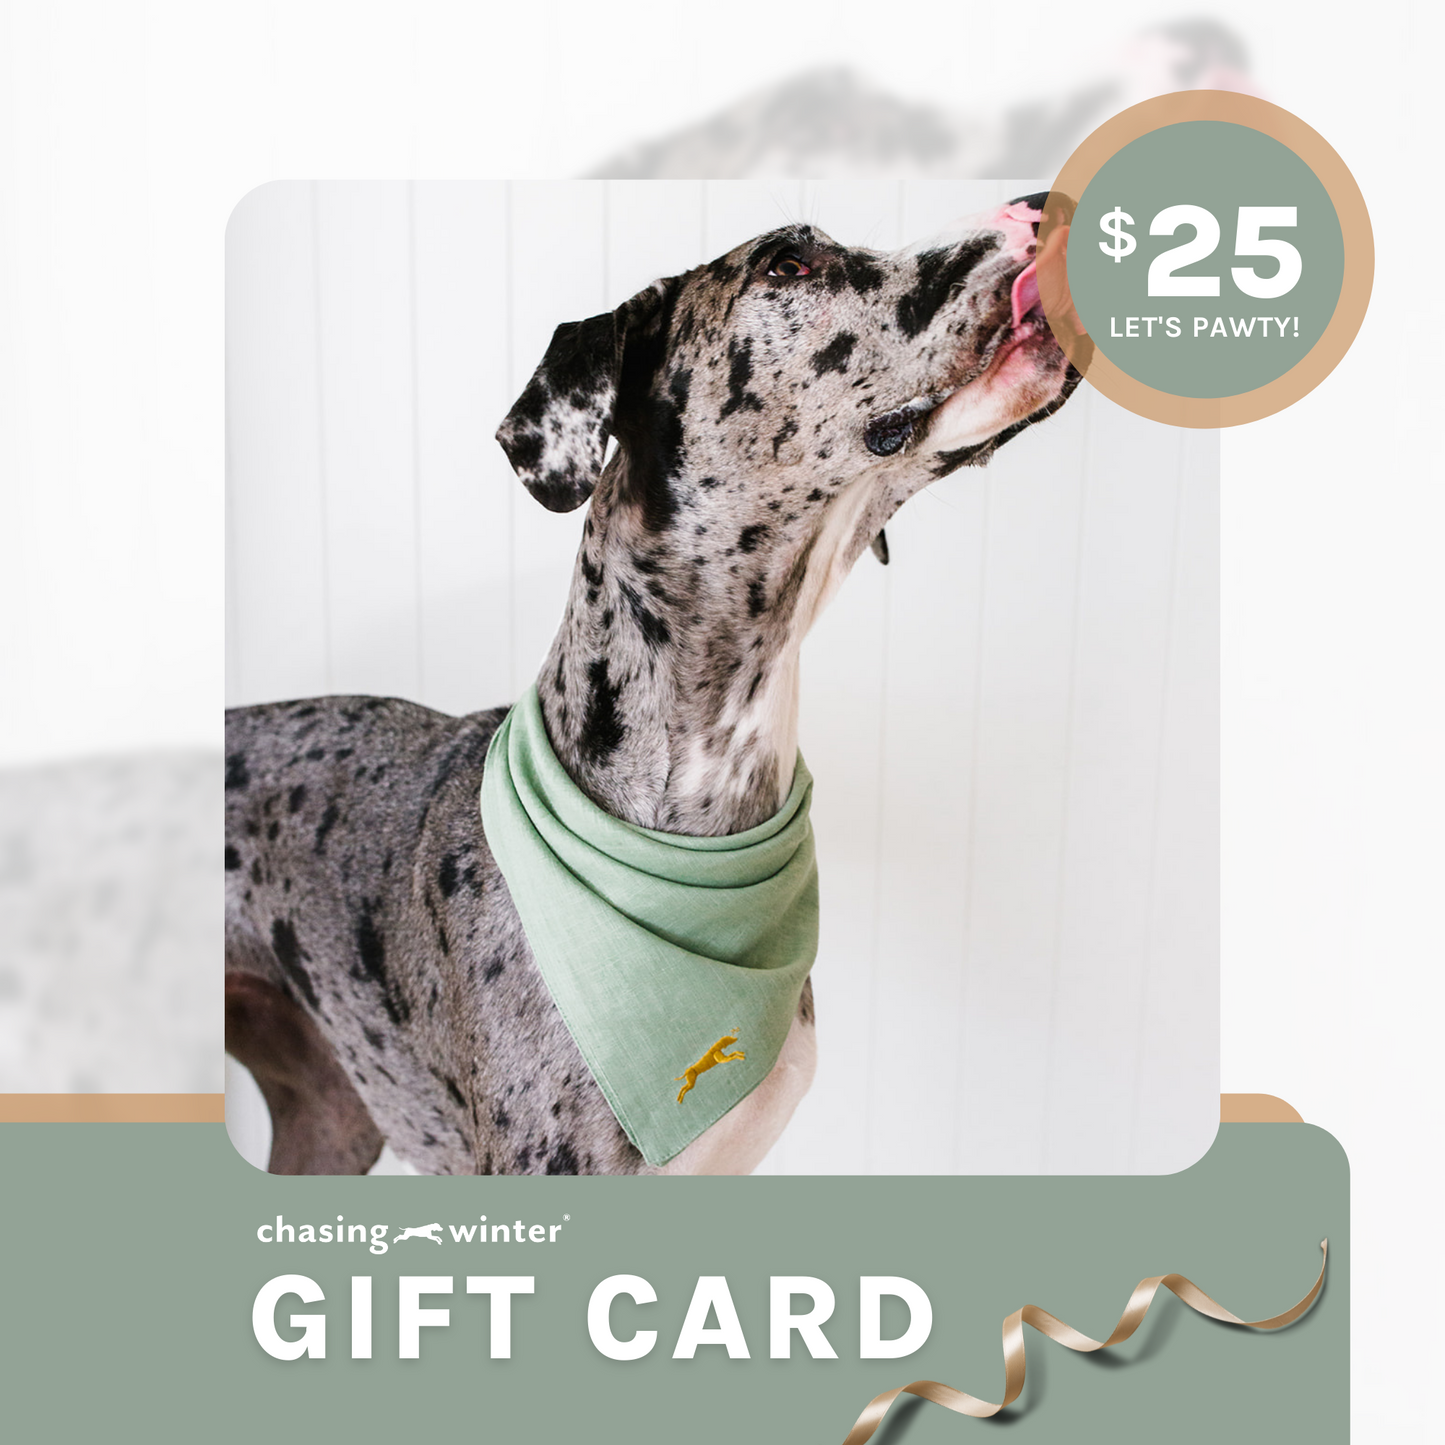 Chasing Winter Gift Card $25